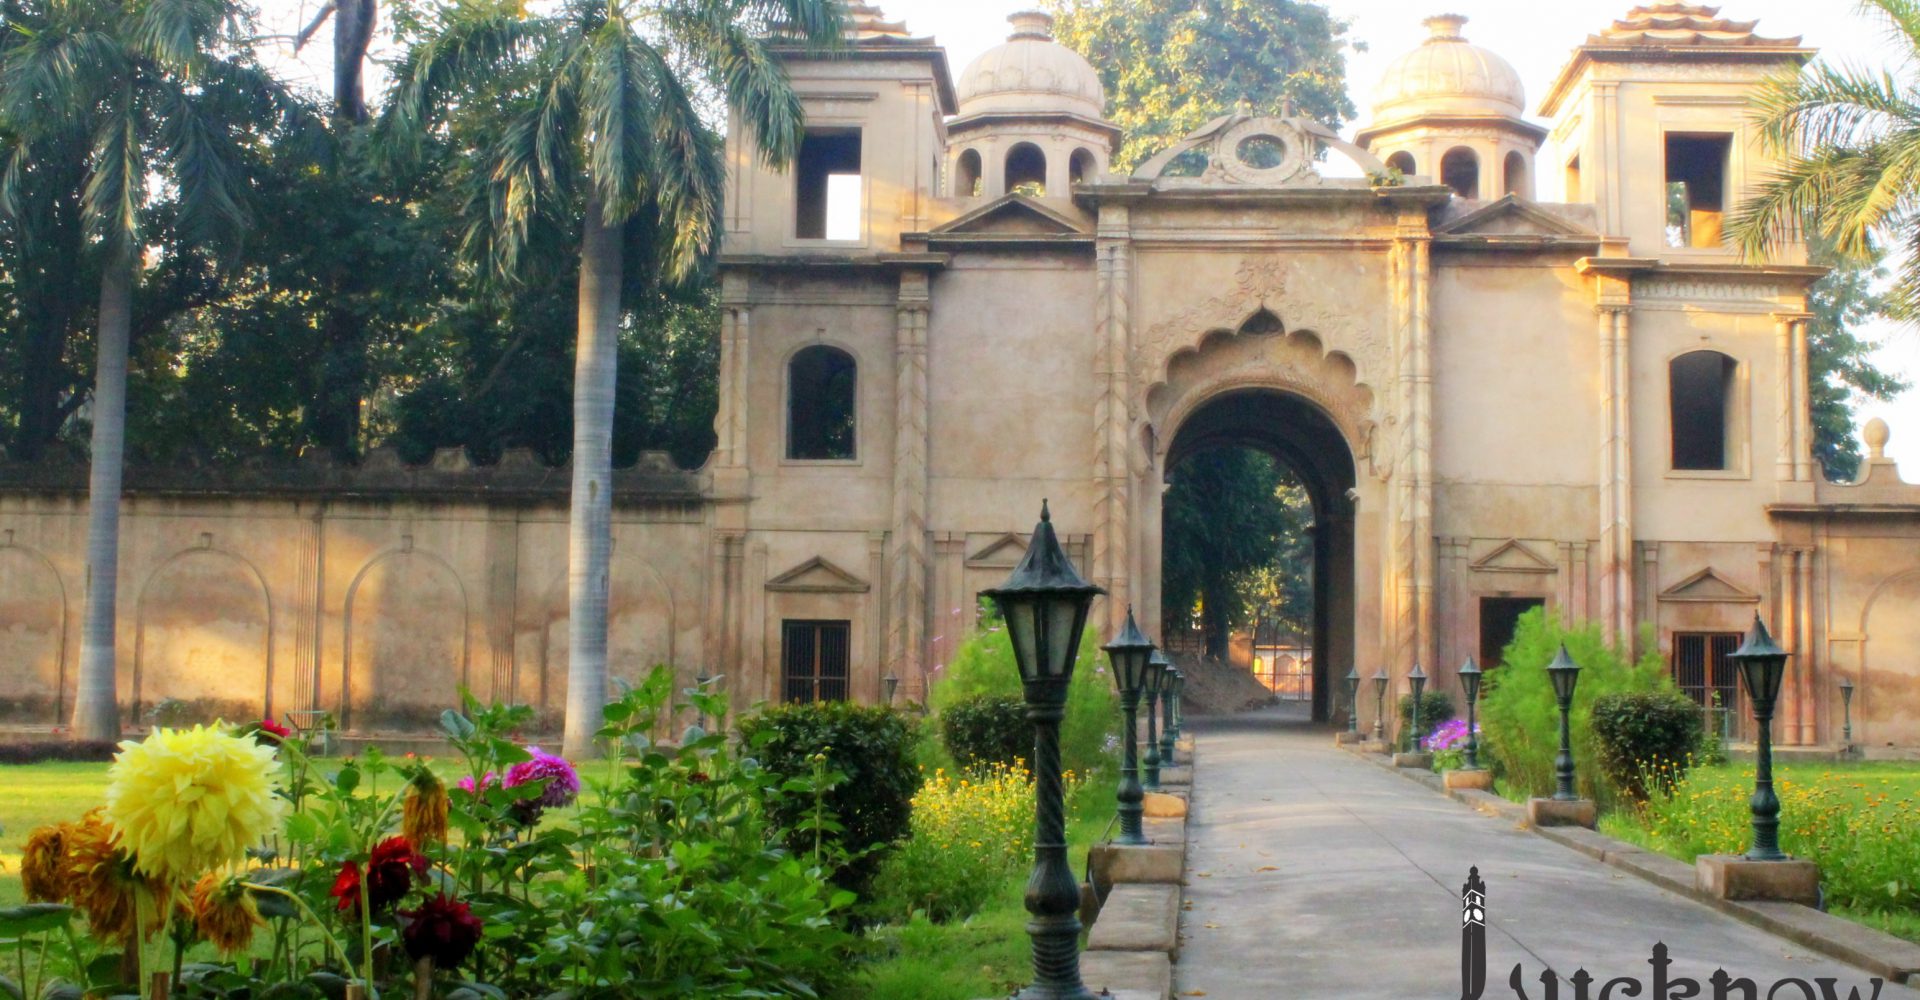 Picture of Gateway at Sikander Bagh, constructed at Lucknow in Medieval times